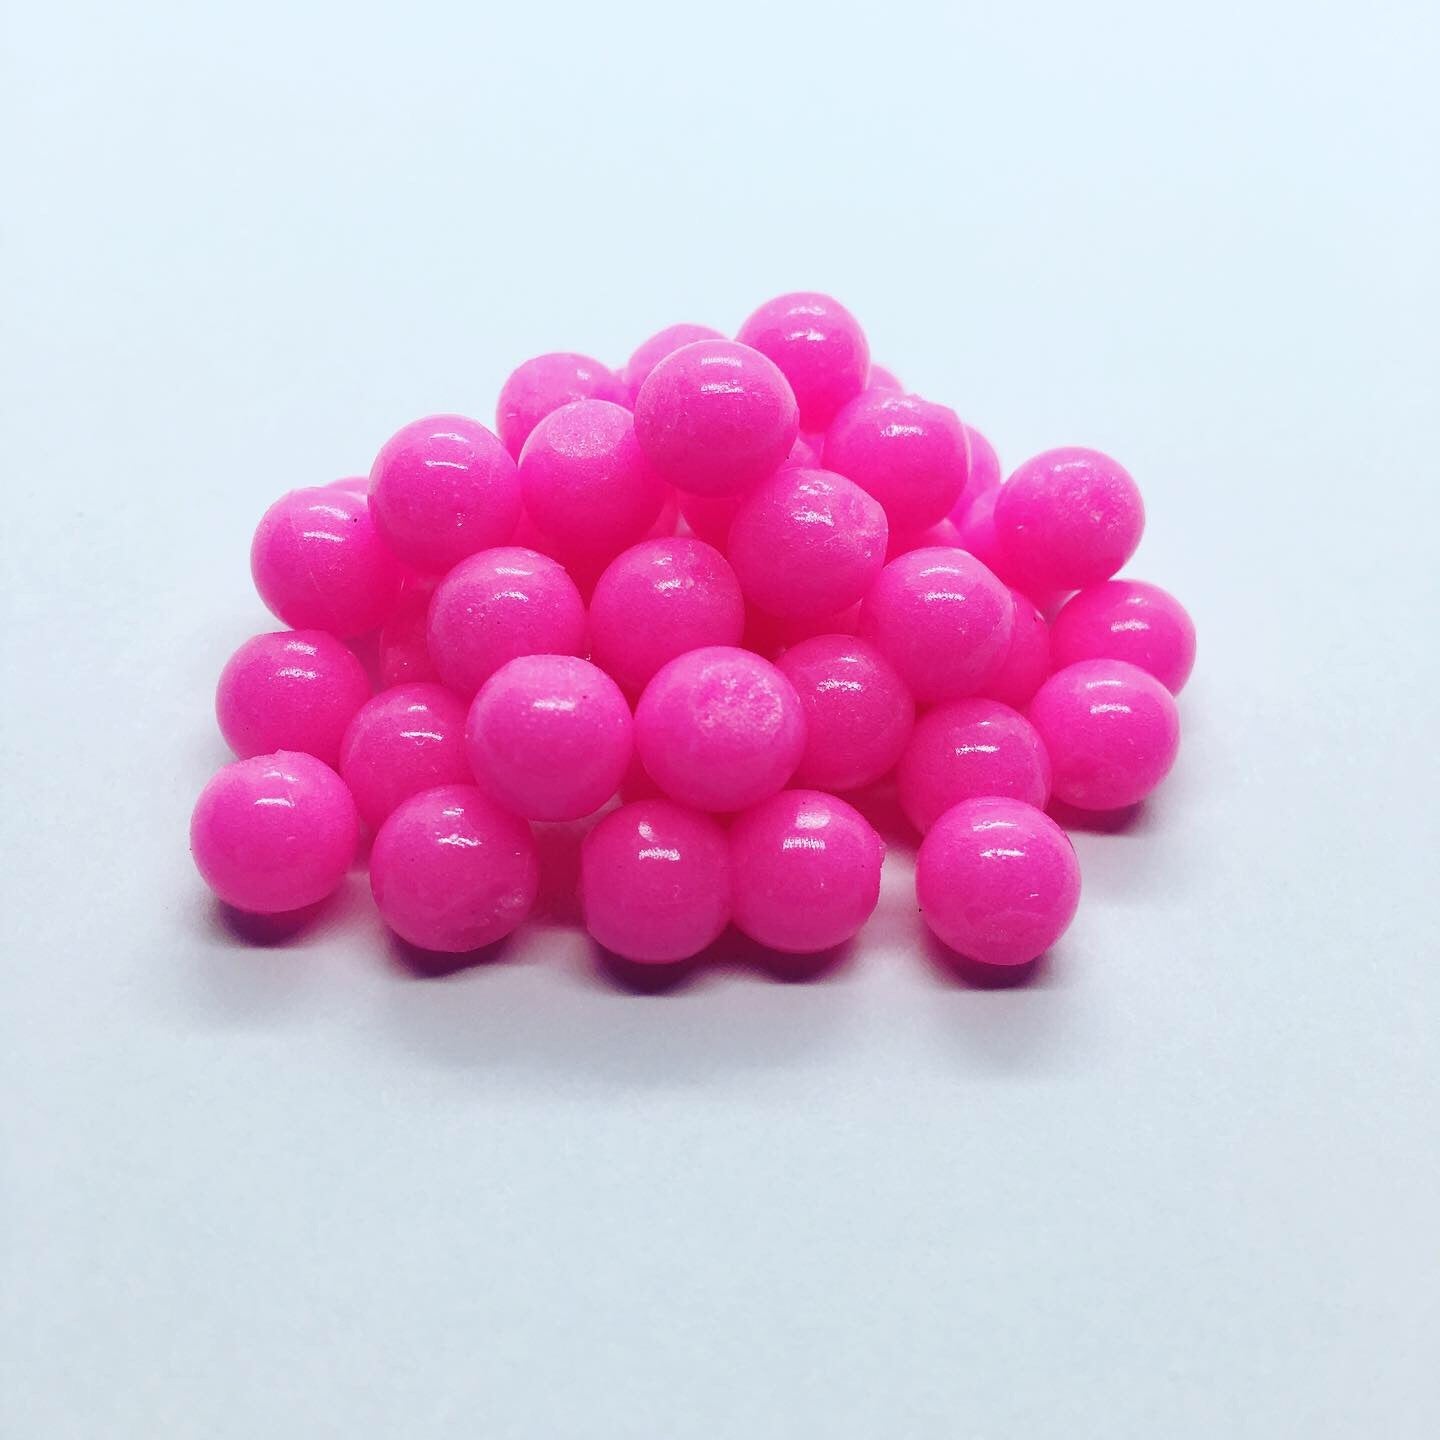 Super Floating Salmon Eggs: Hot Pink